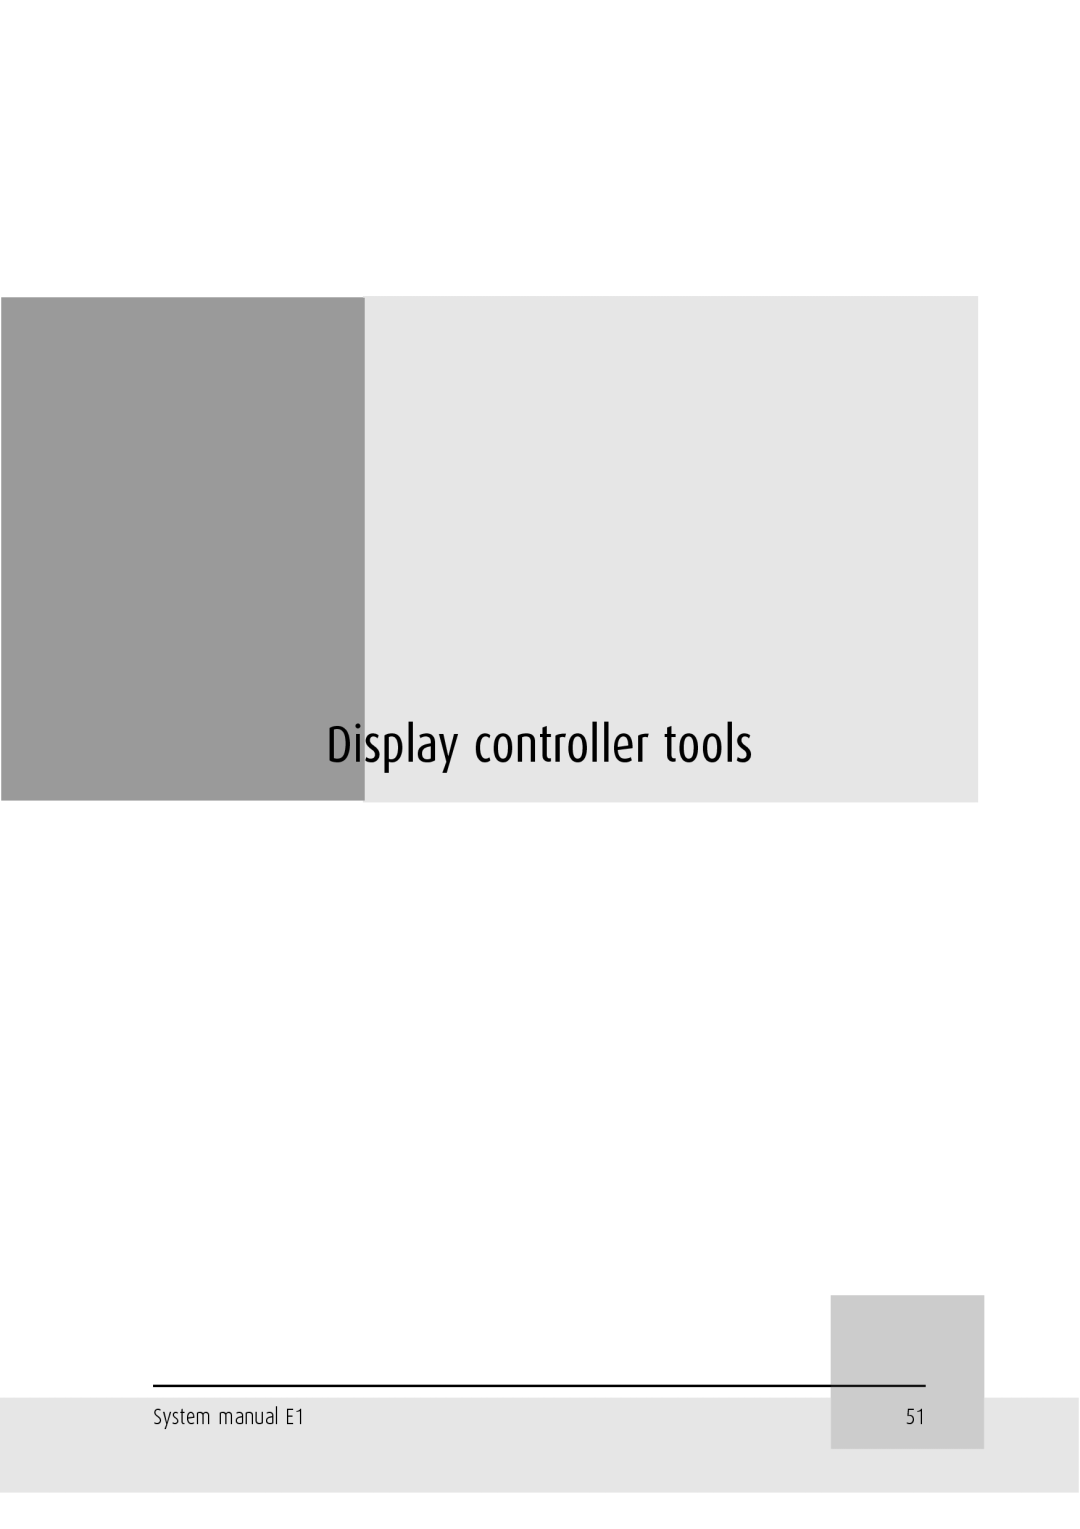 Barco Display controller tools, System manual E1 